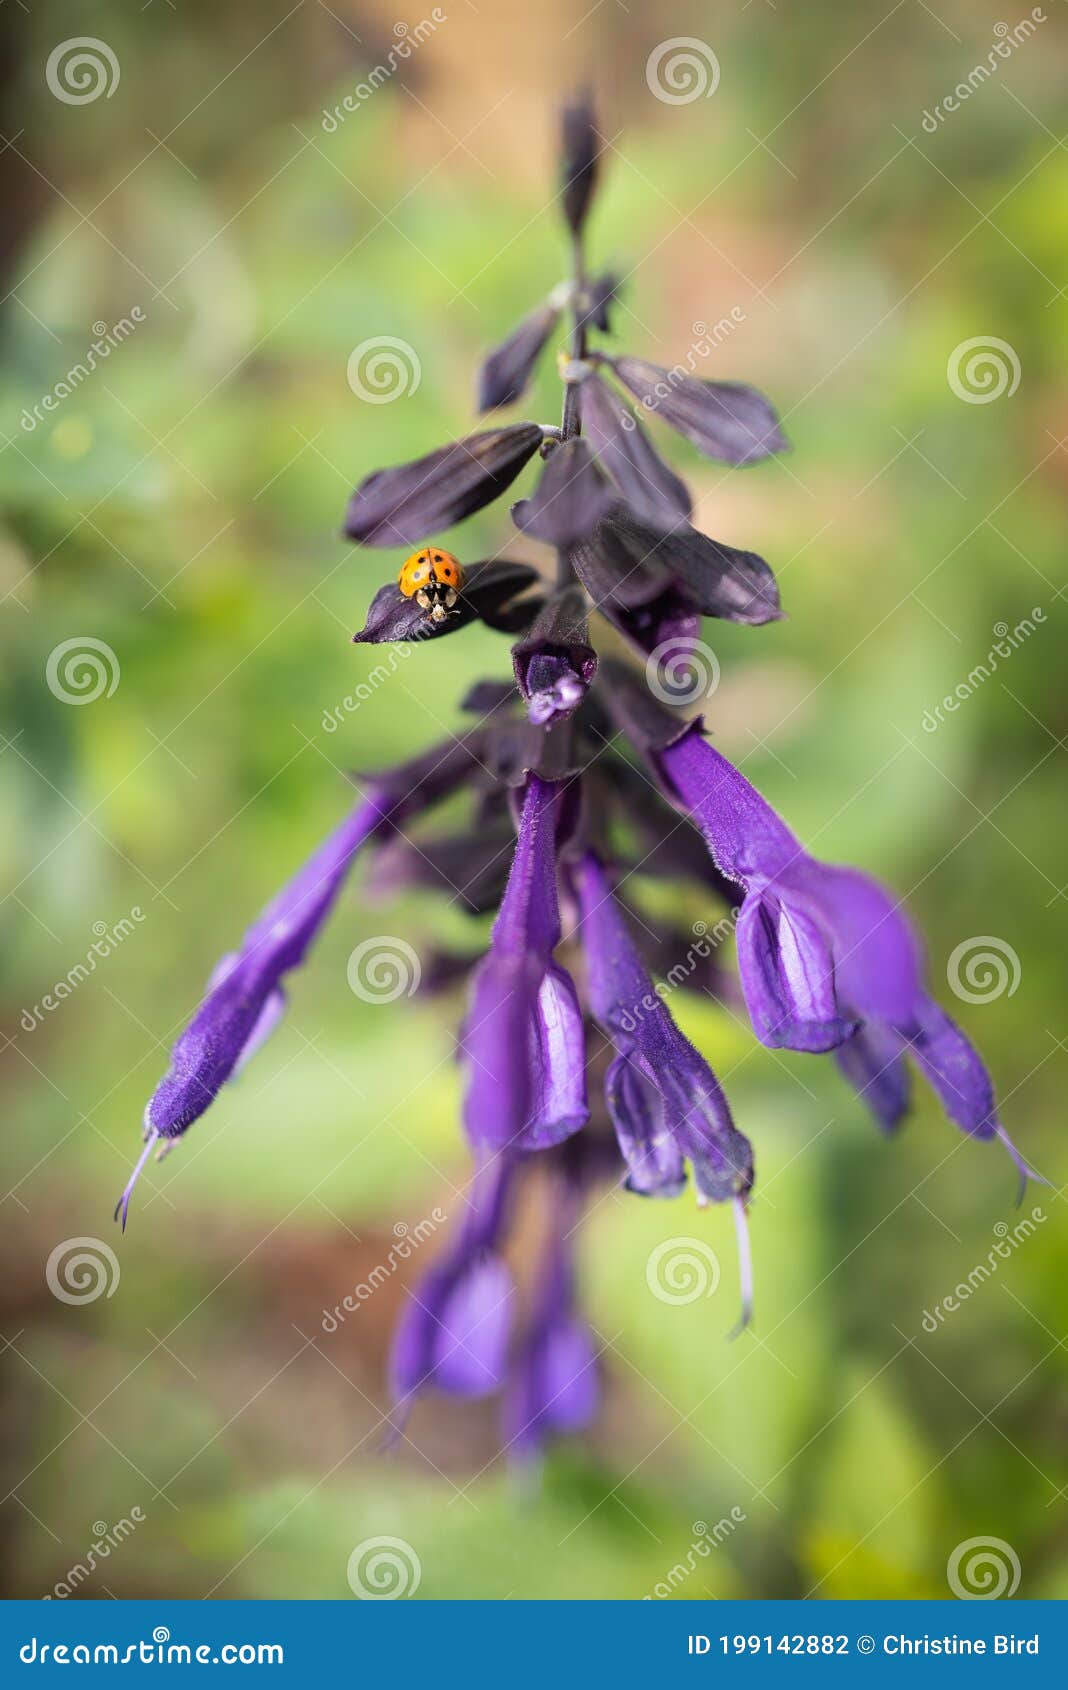 shallow focus image of purple salvia amistad flowers. a ladybug or lady bird is on one of the petals